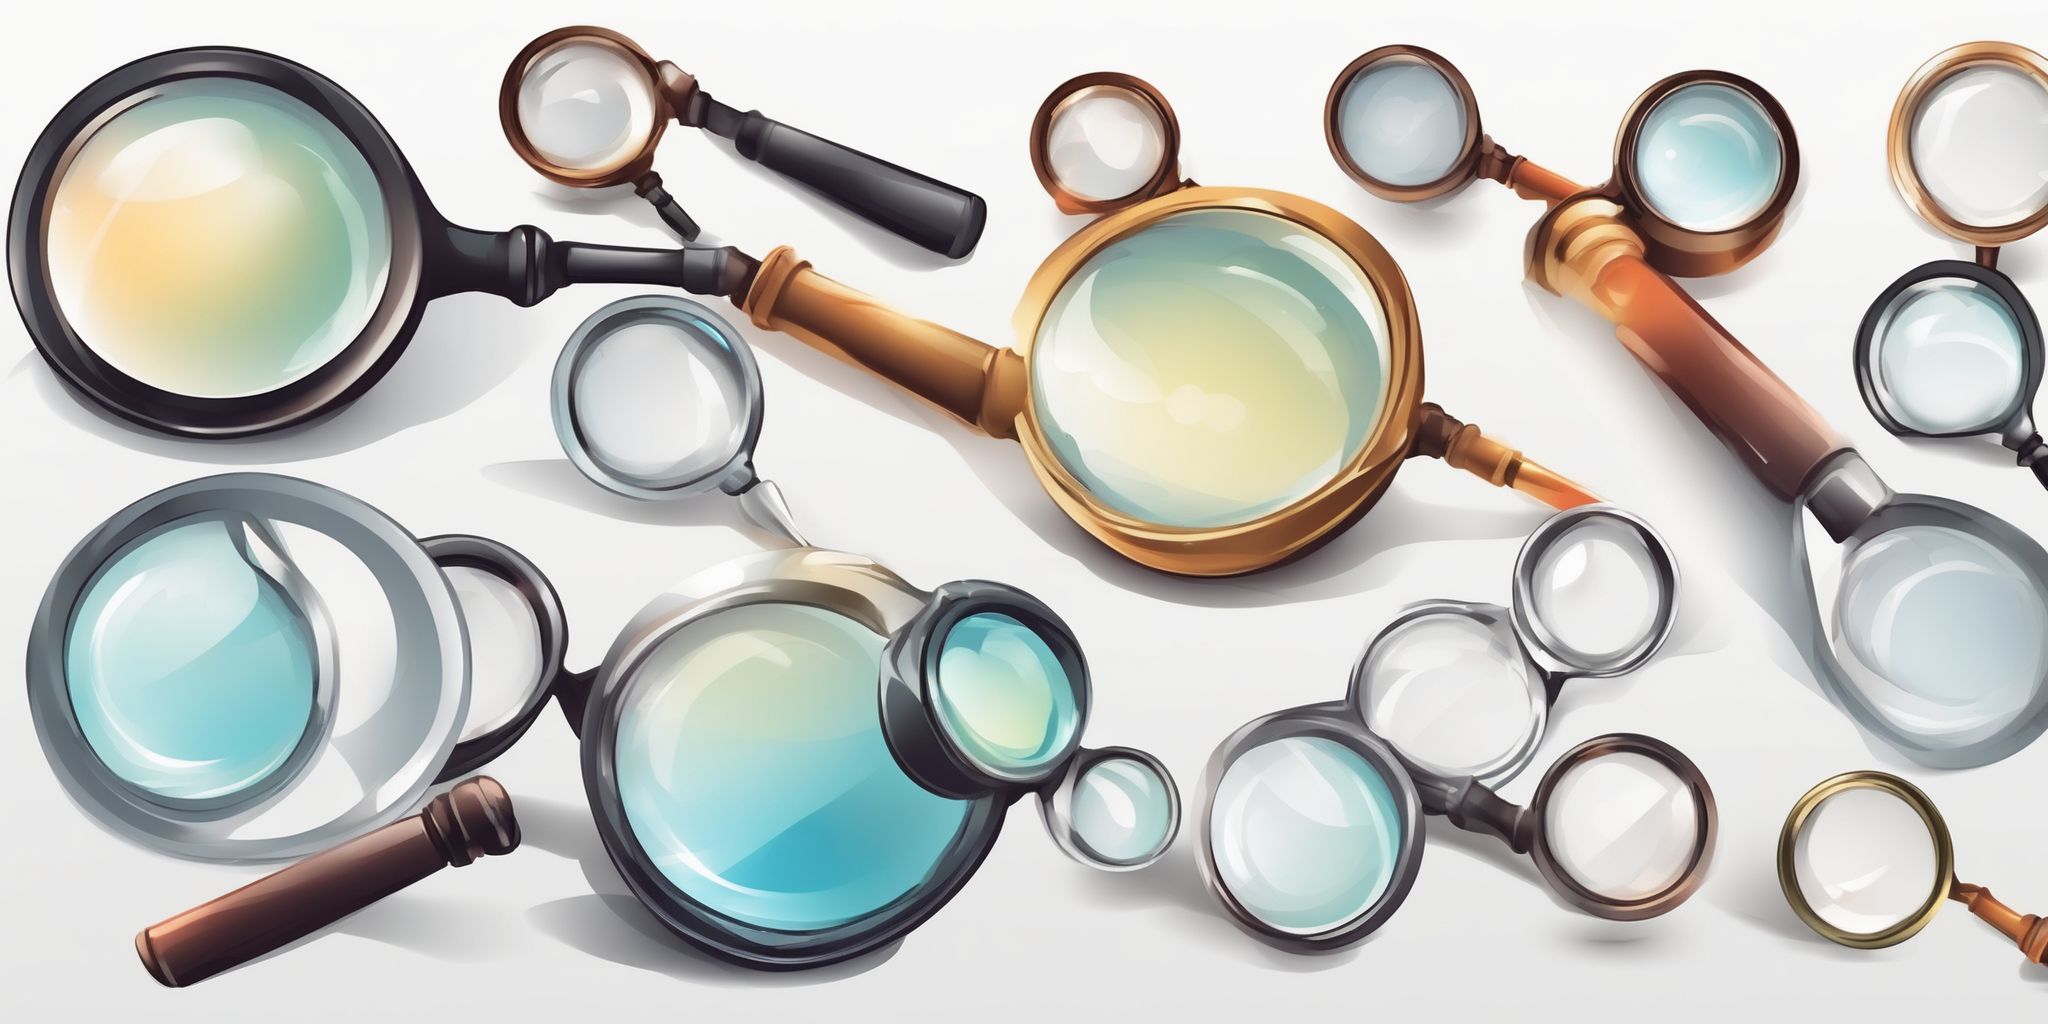 Magnifying glass in illustration style with gradients and white background